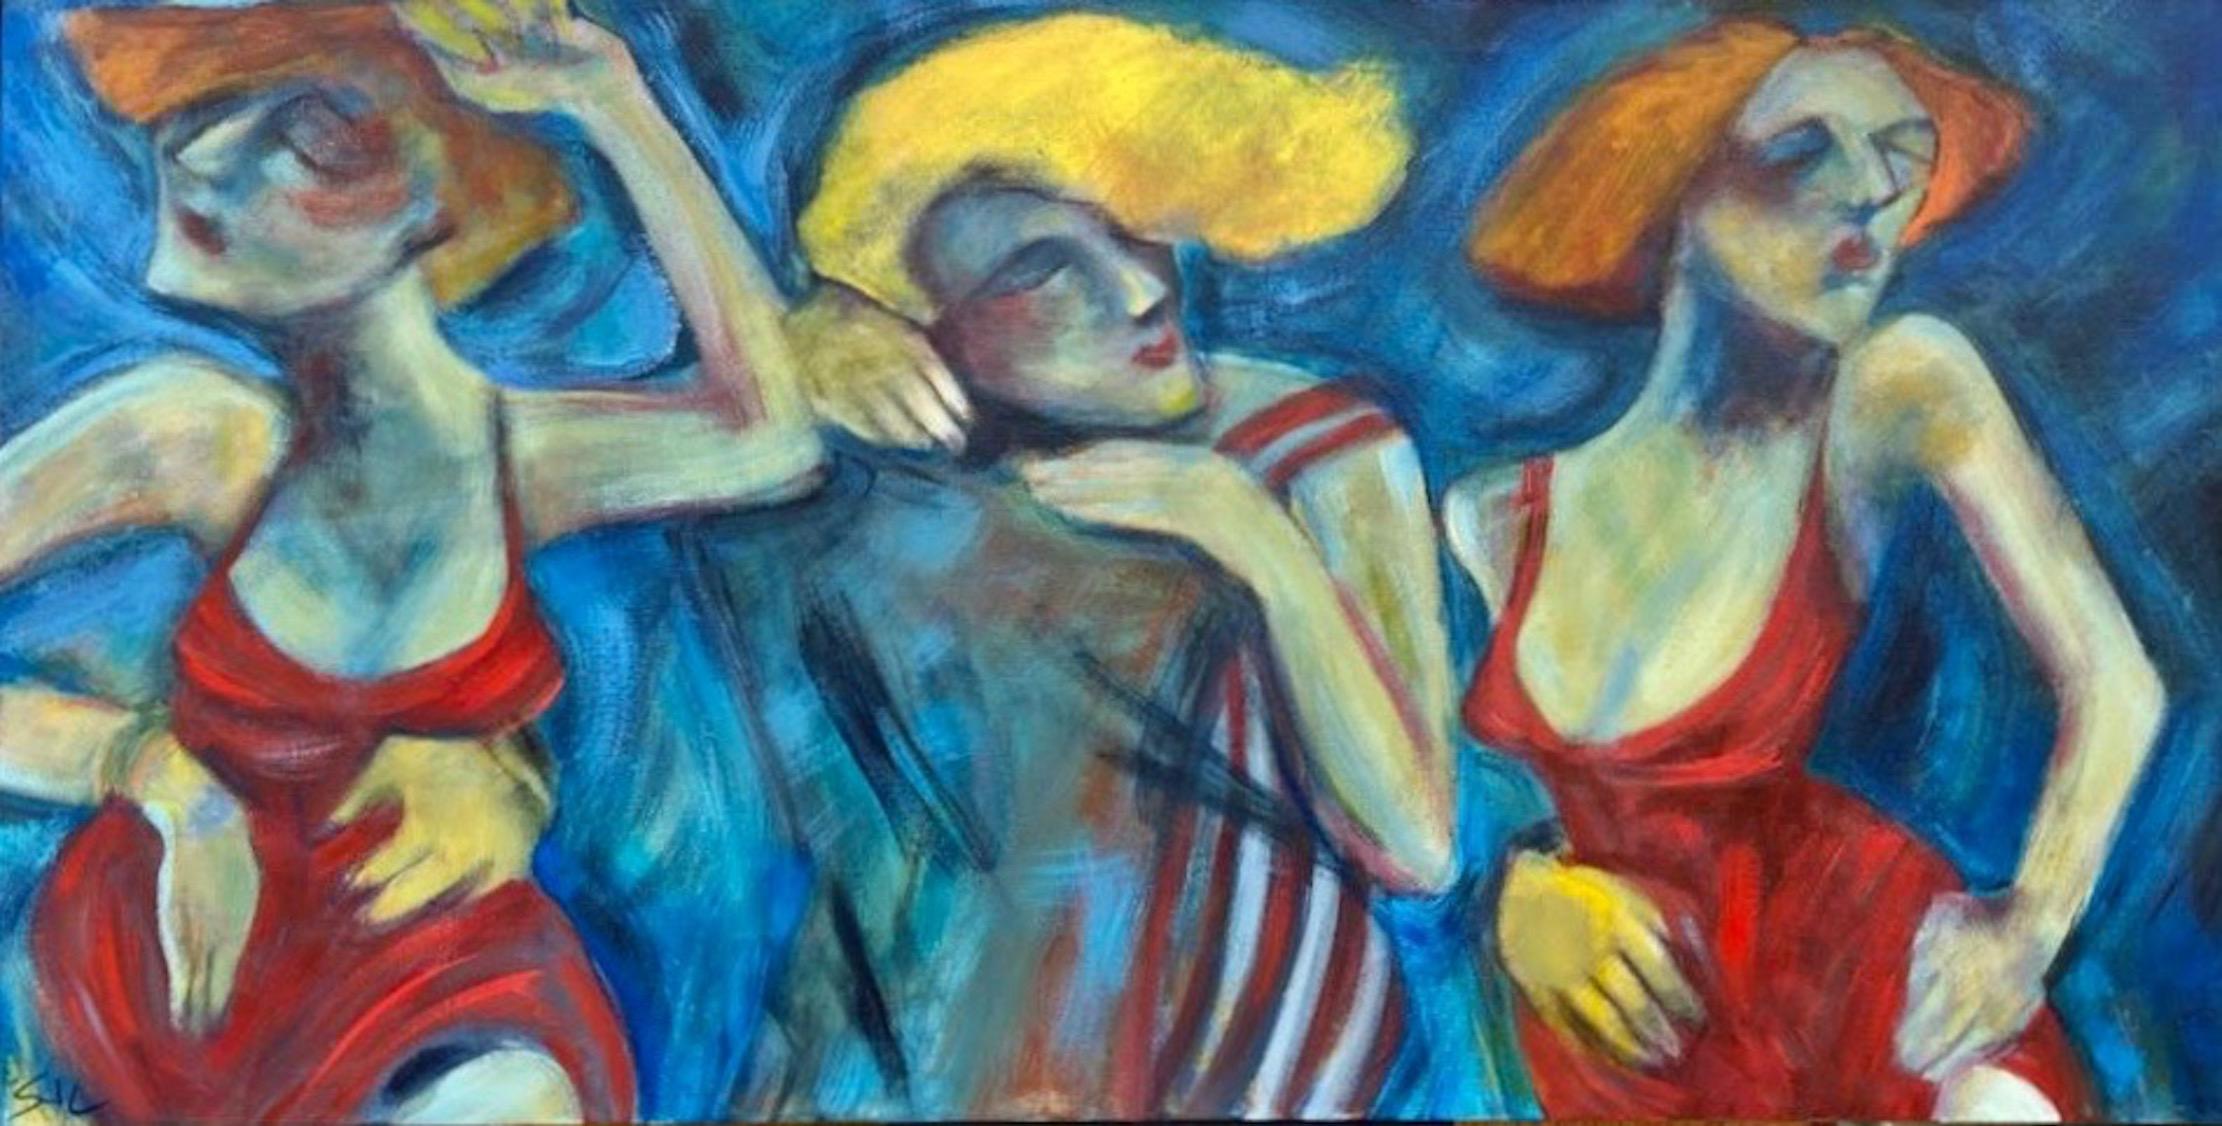 Sandra Jones Campbell Figurative Painting - "Dream Dancing" Contemporary Expressionist acrylic figure painting